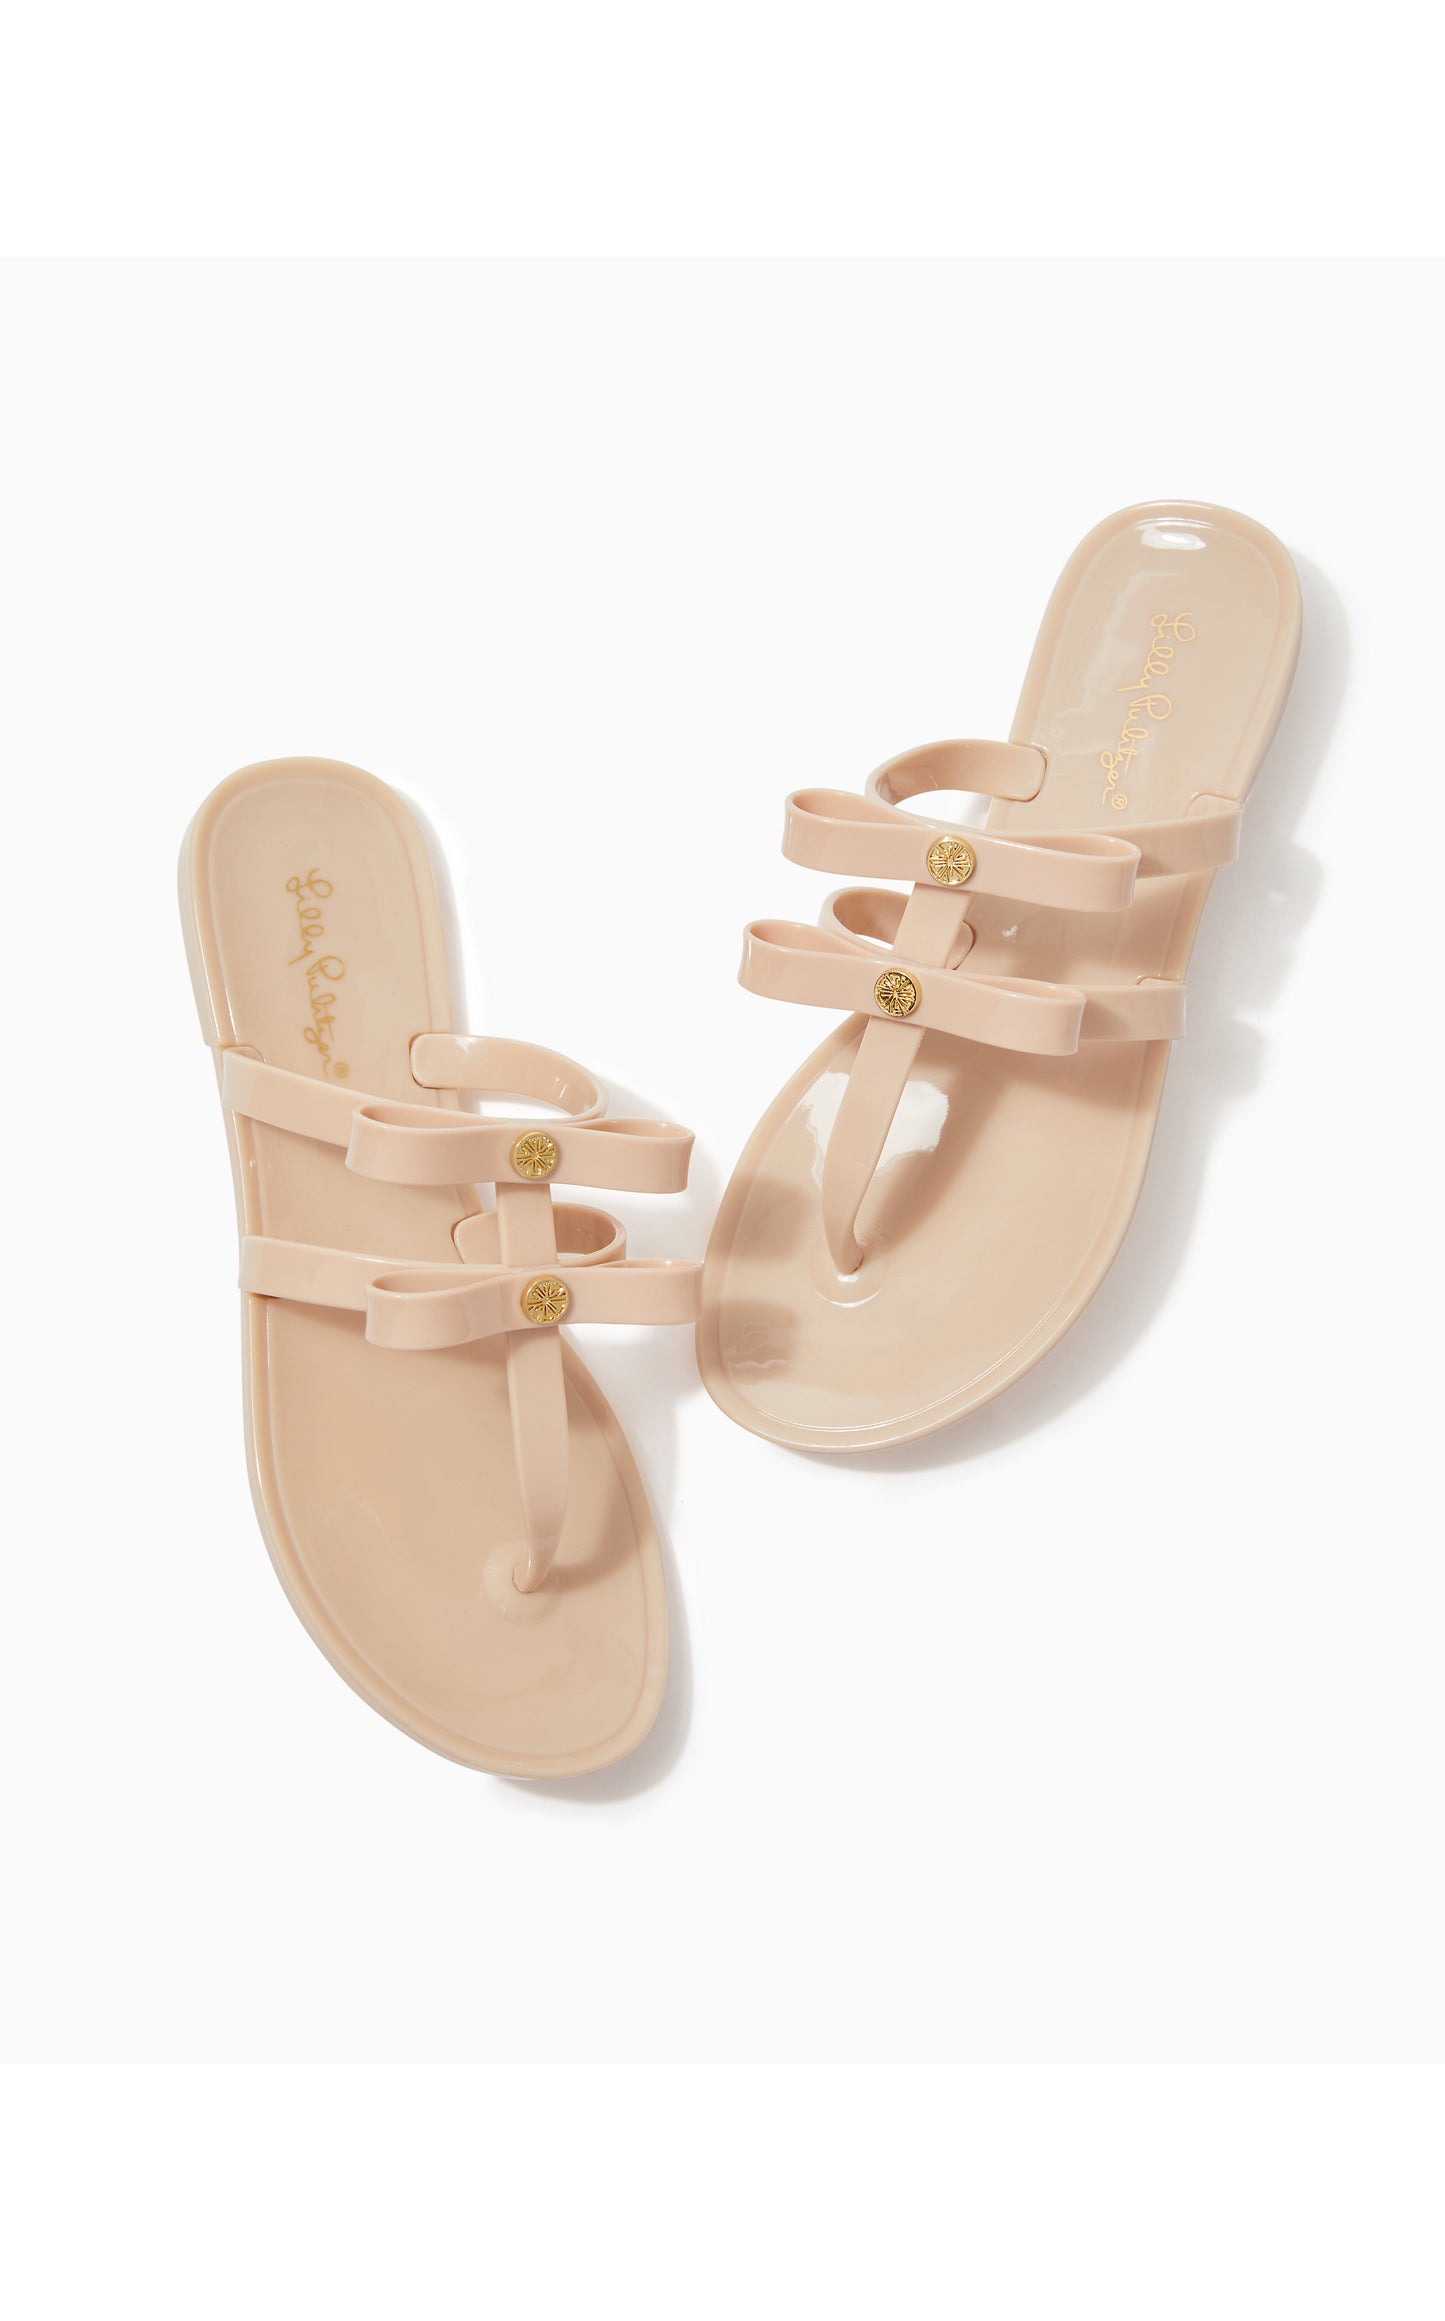 Harlow Jelly Sandal in Nude